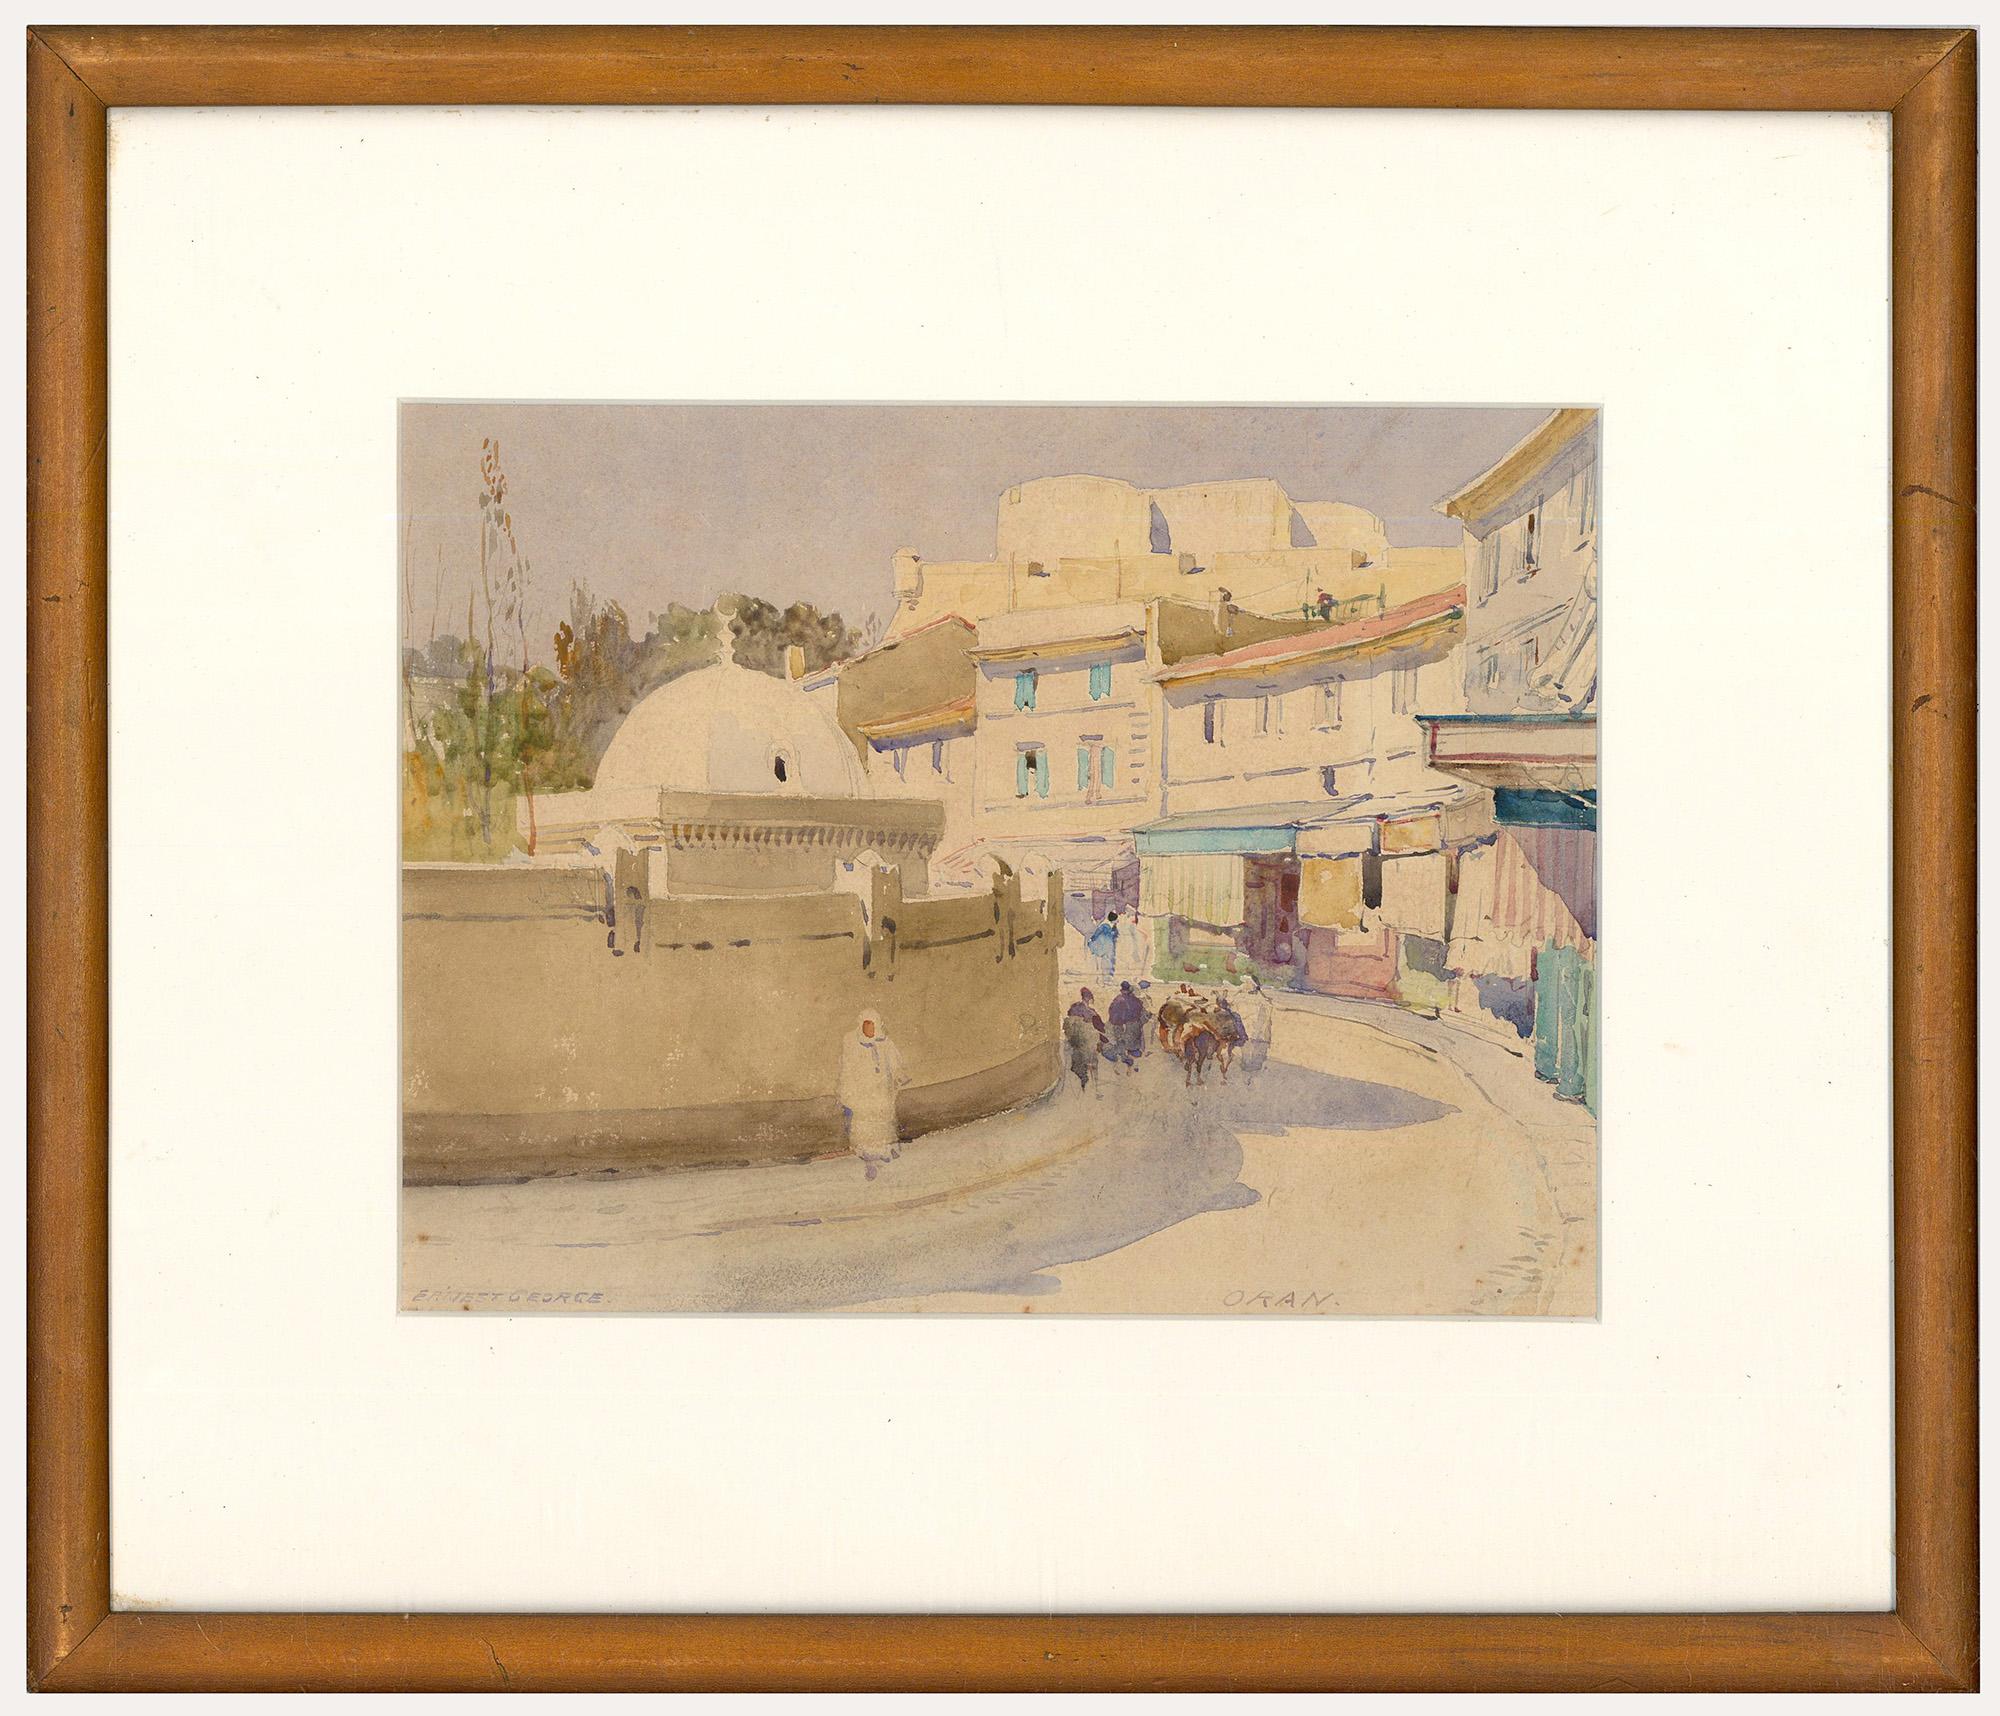 Unknown Landscape Art - Ernest George (1839-1922) - Framed Early 20th Century Watercolour, Oran